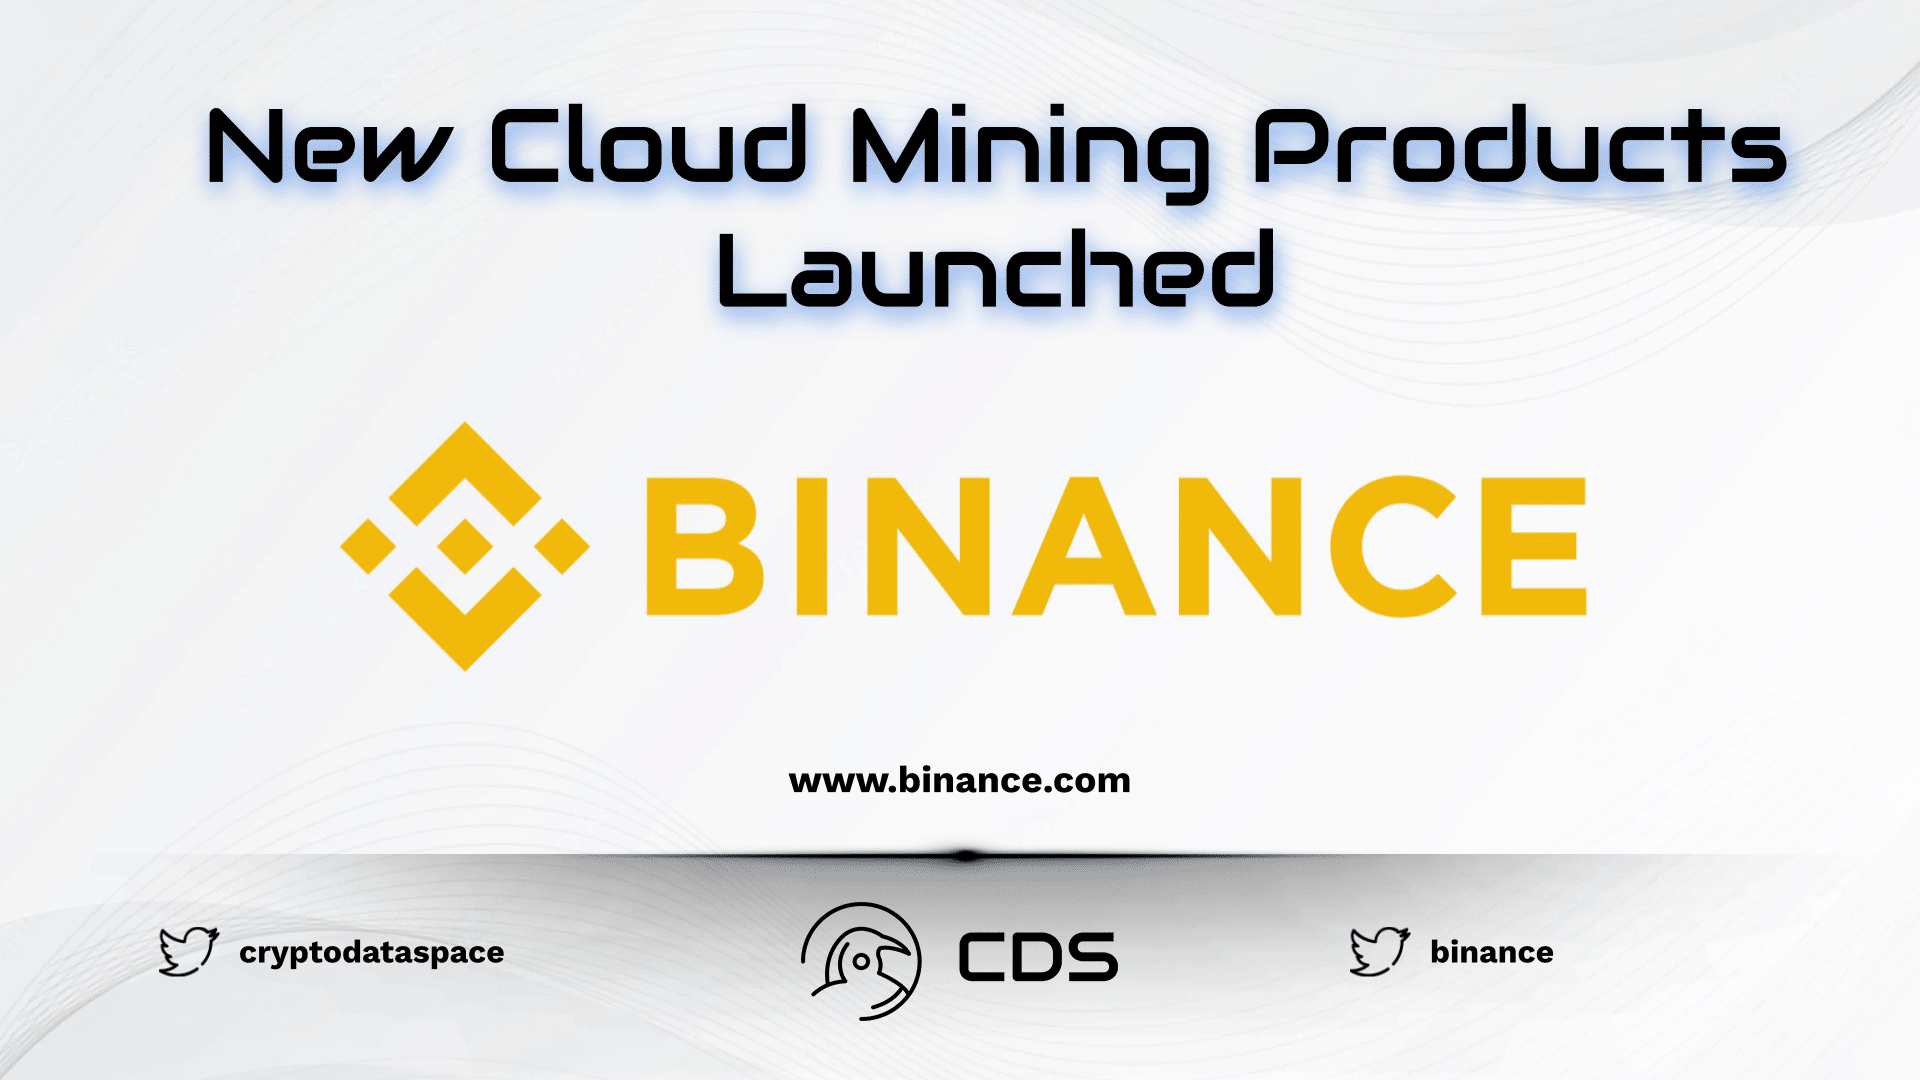 New Cloud Mining Products Launched